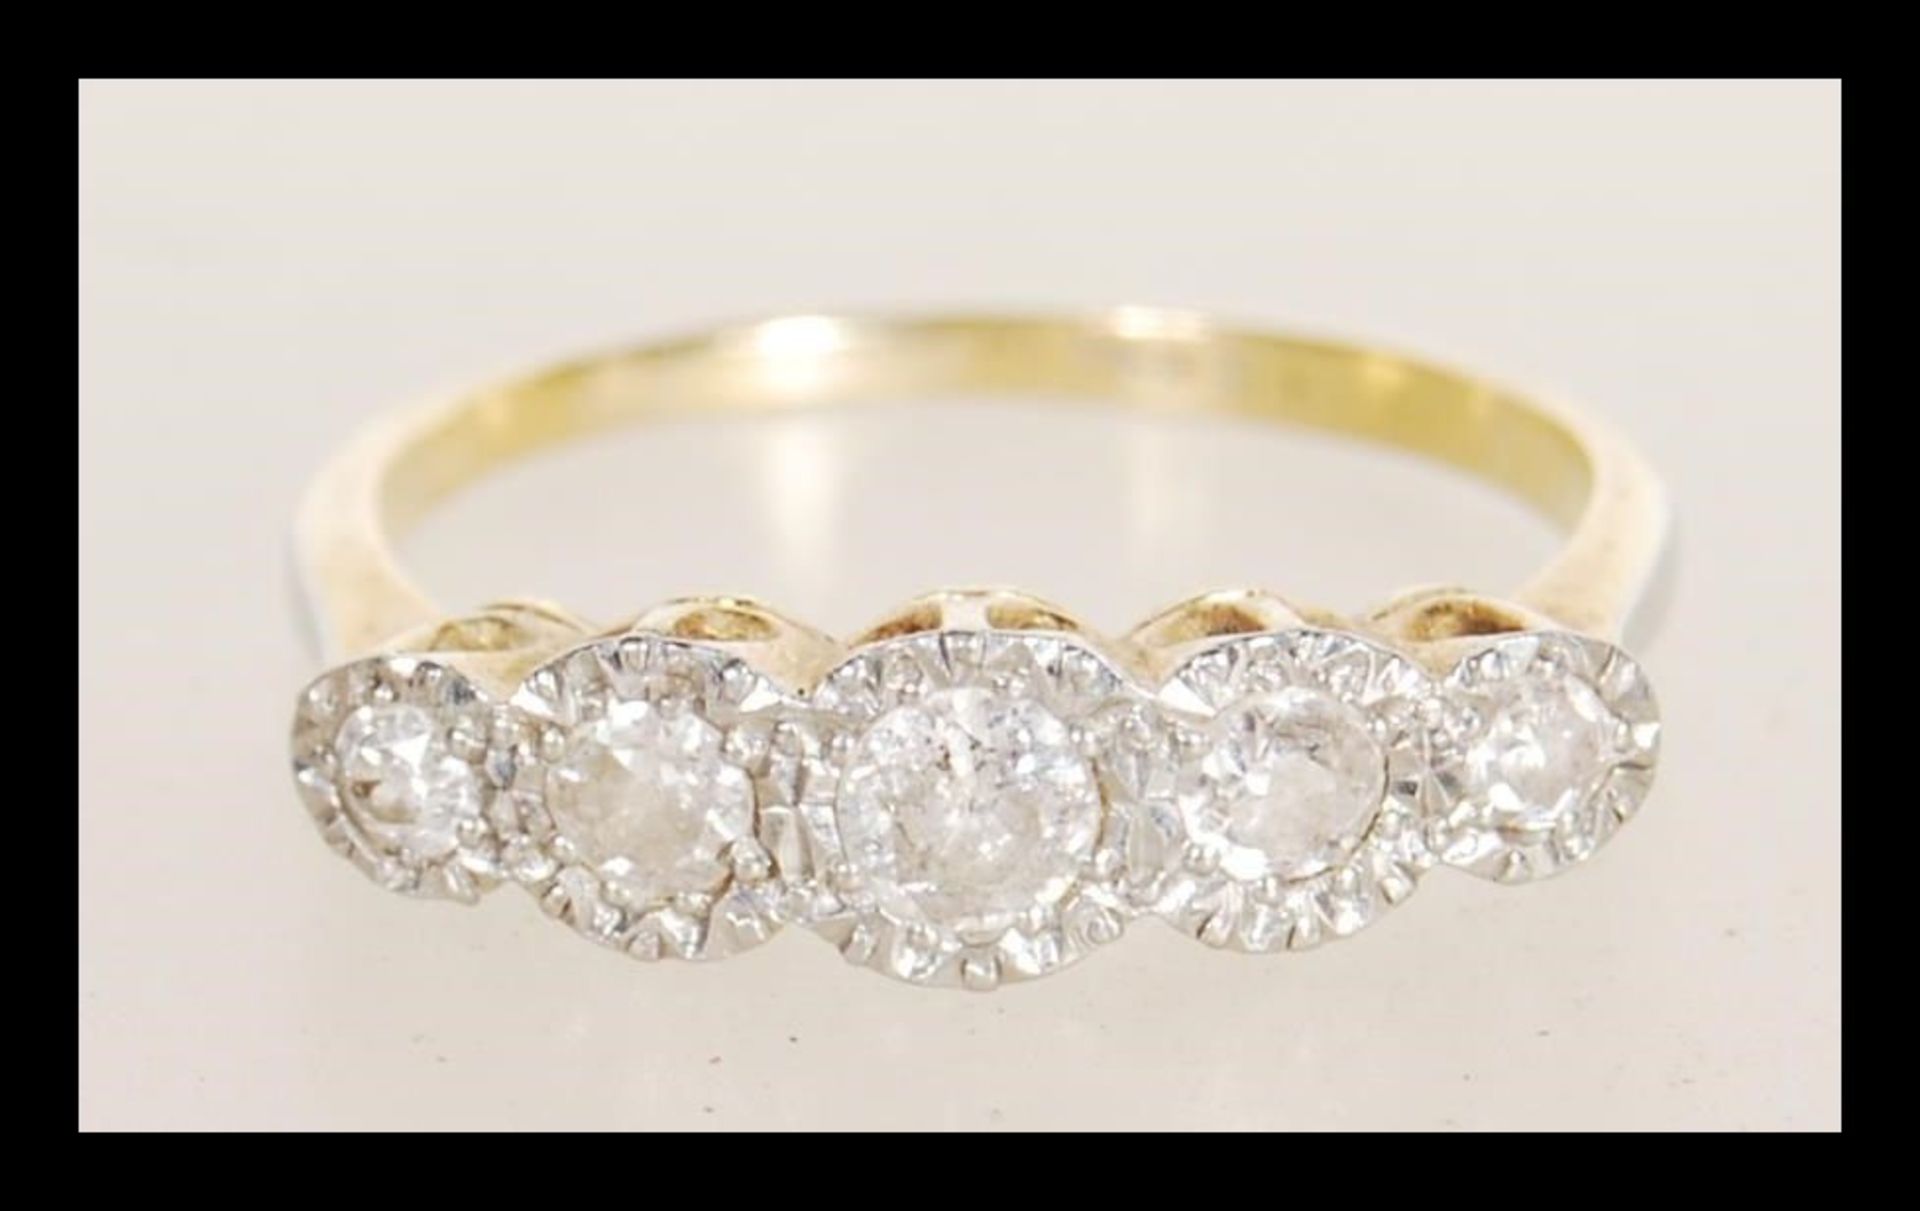 An early 20th century stamped 18ct gold ring illusion set with five brilliant cut diamonds.